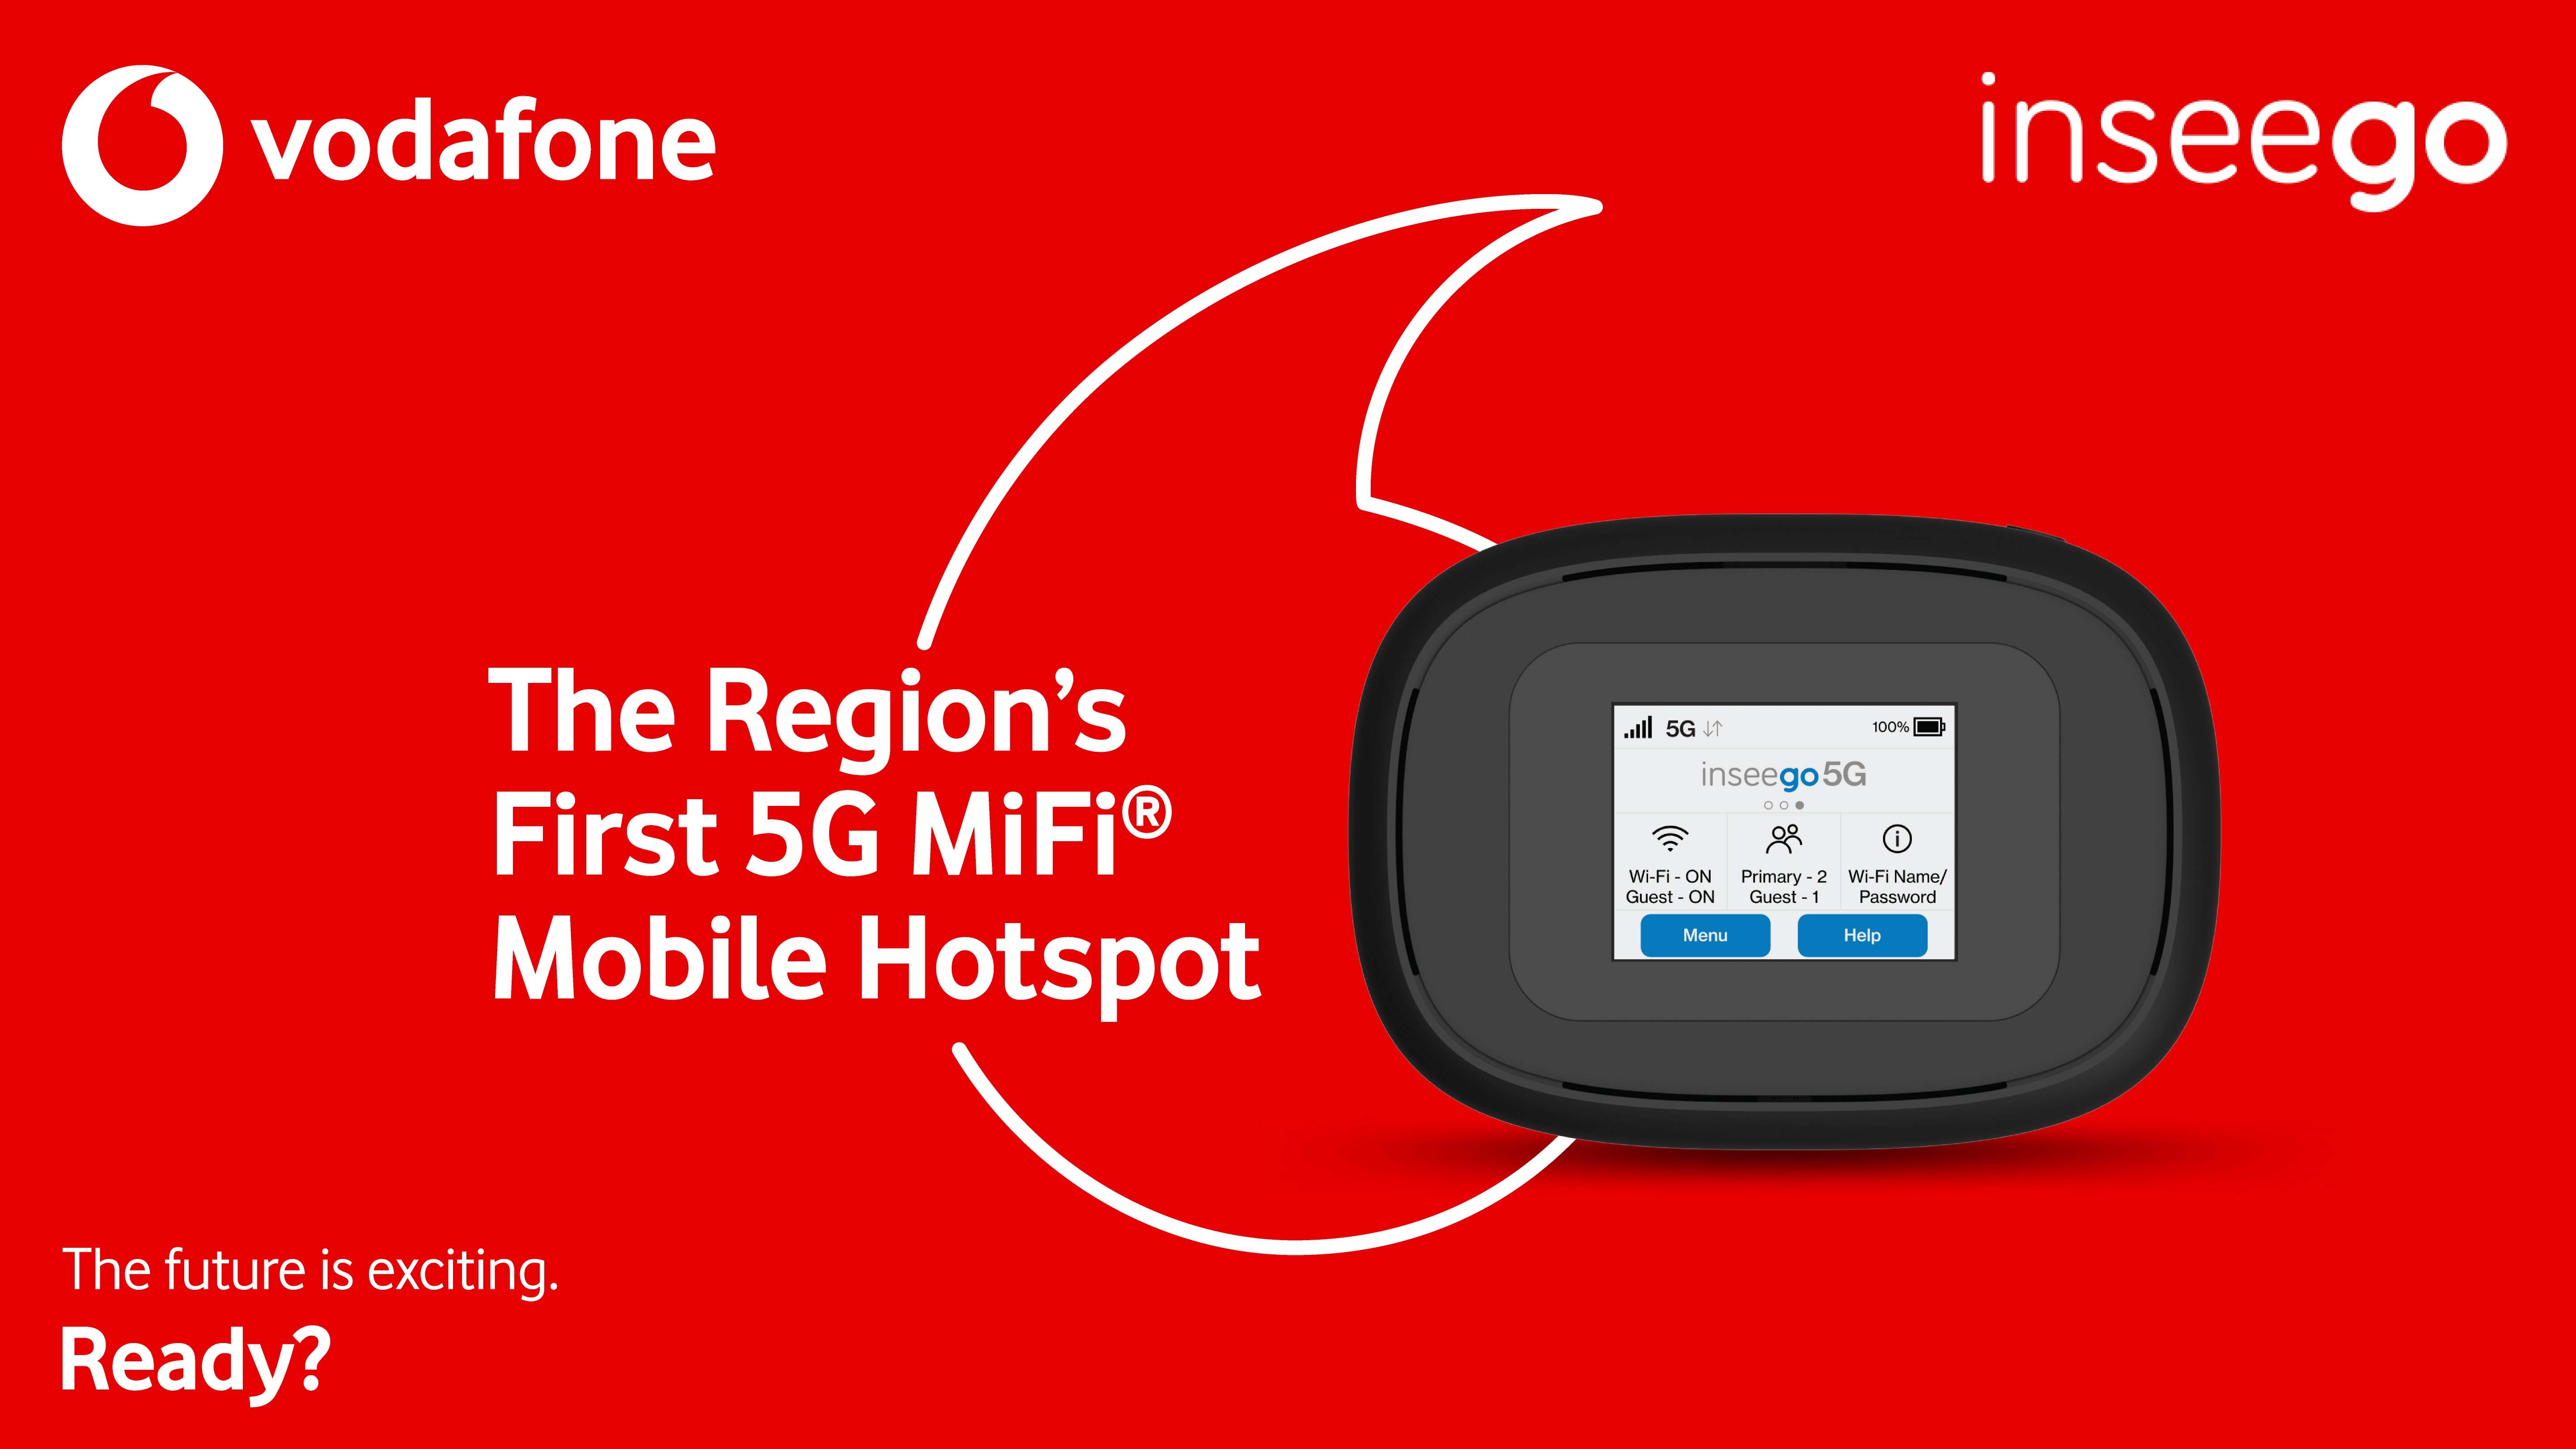 Vodafone 5G Mobile Hotspot is the brand's first 5G MiFi device